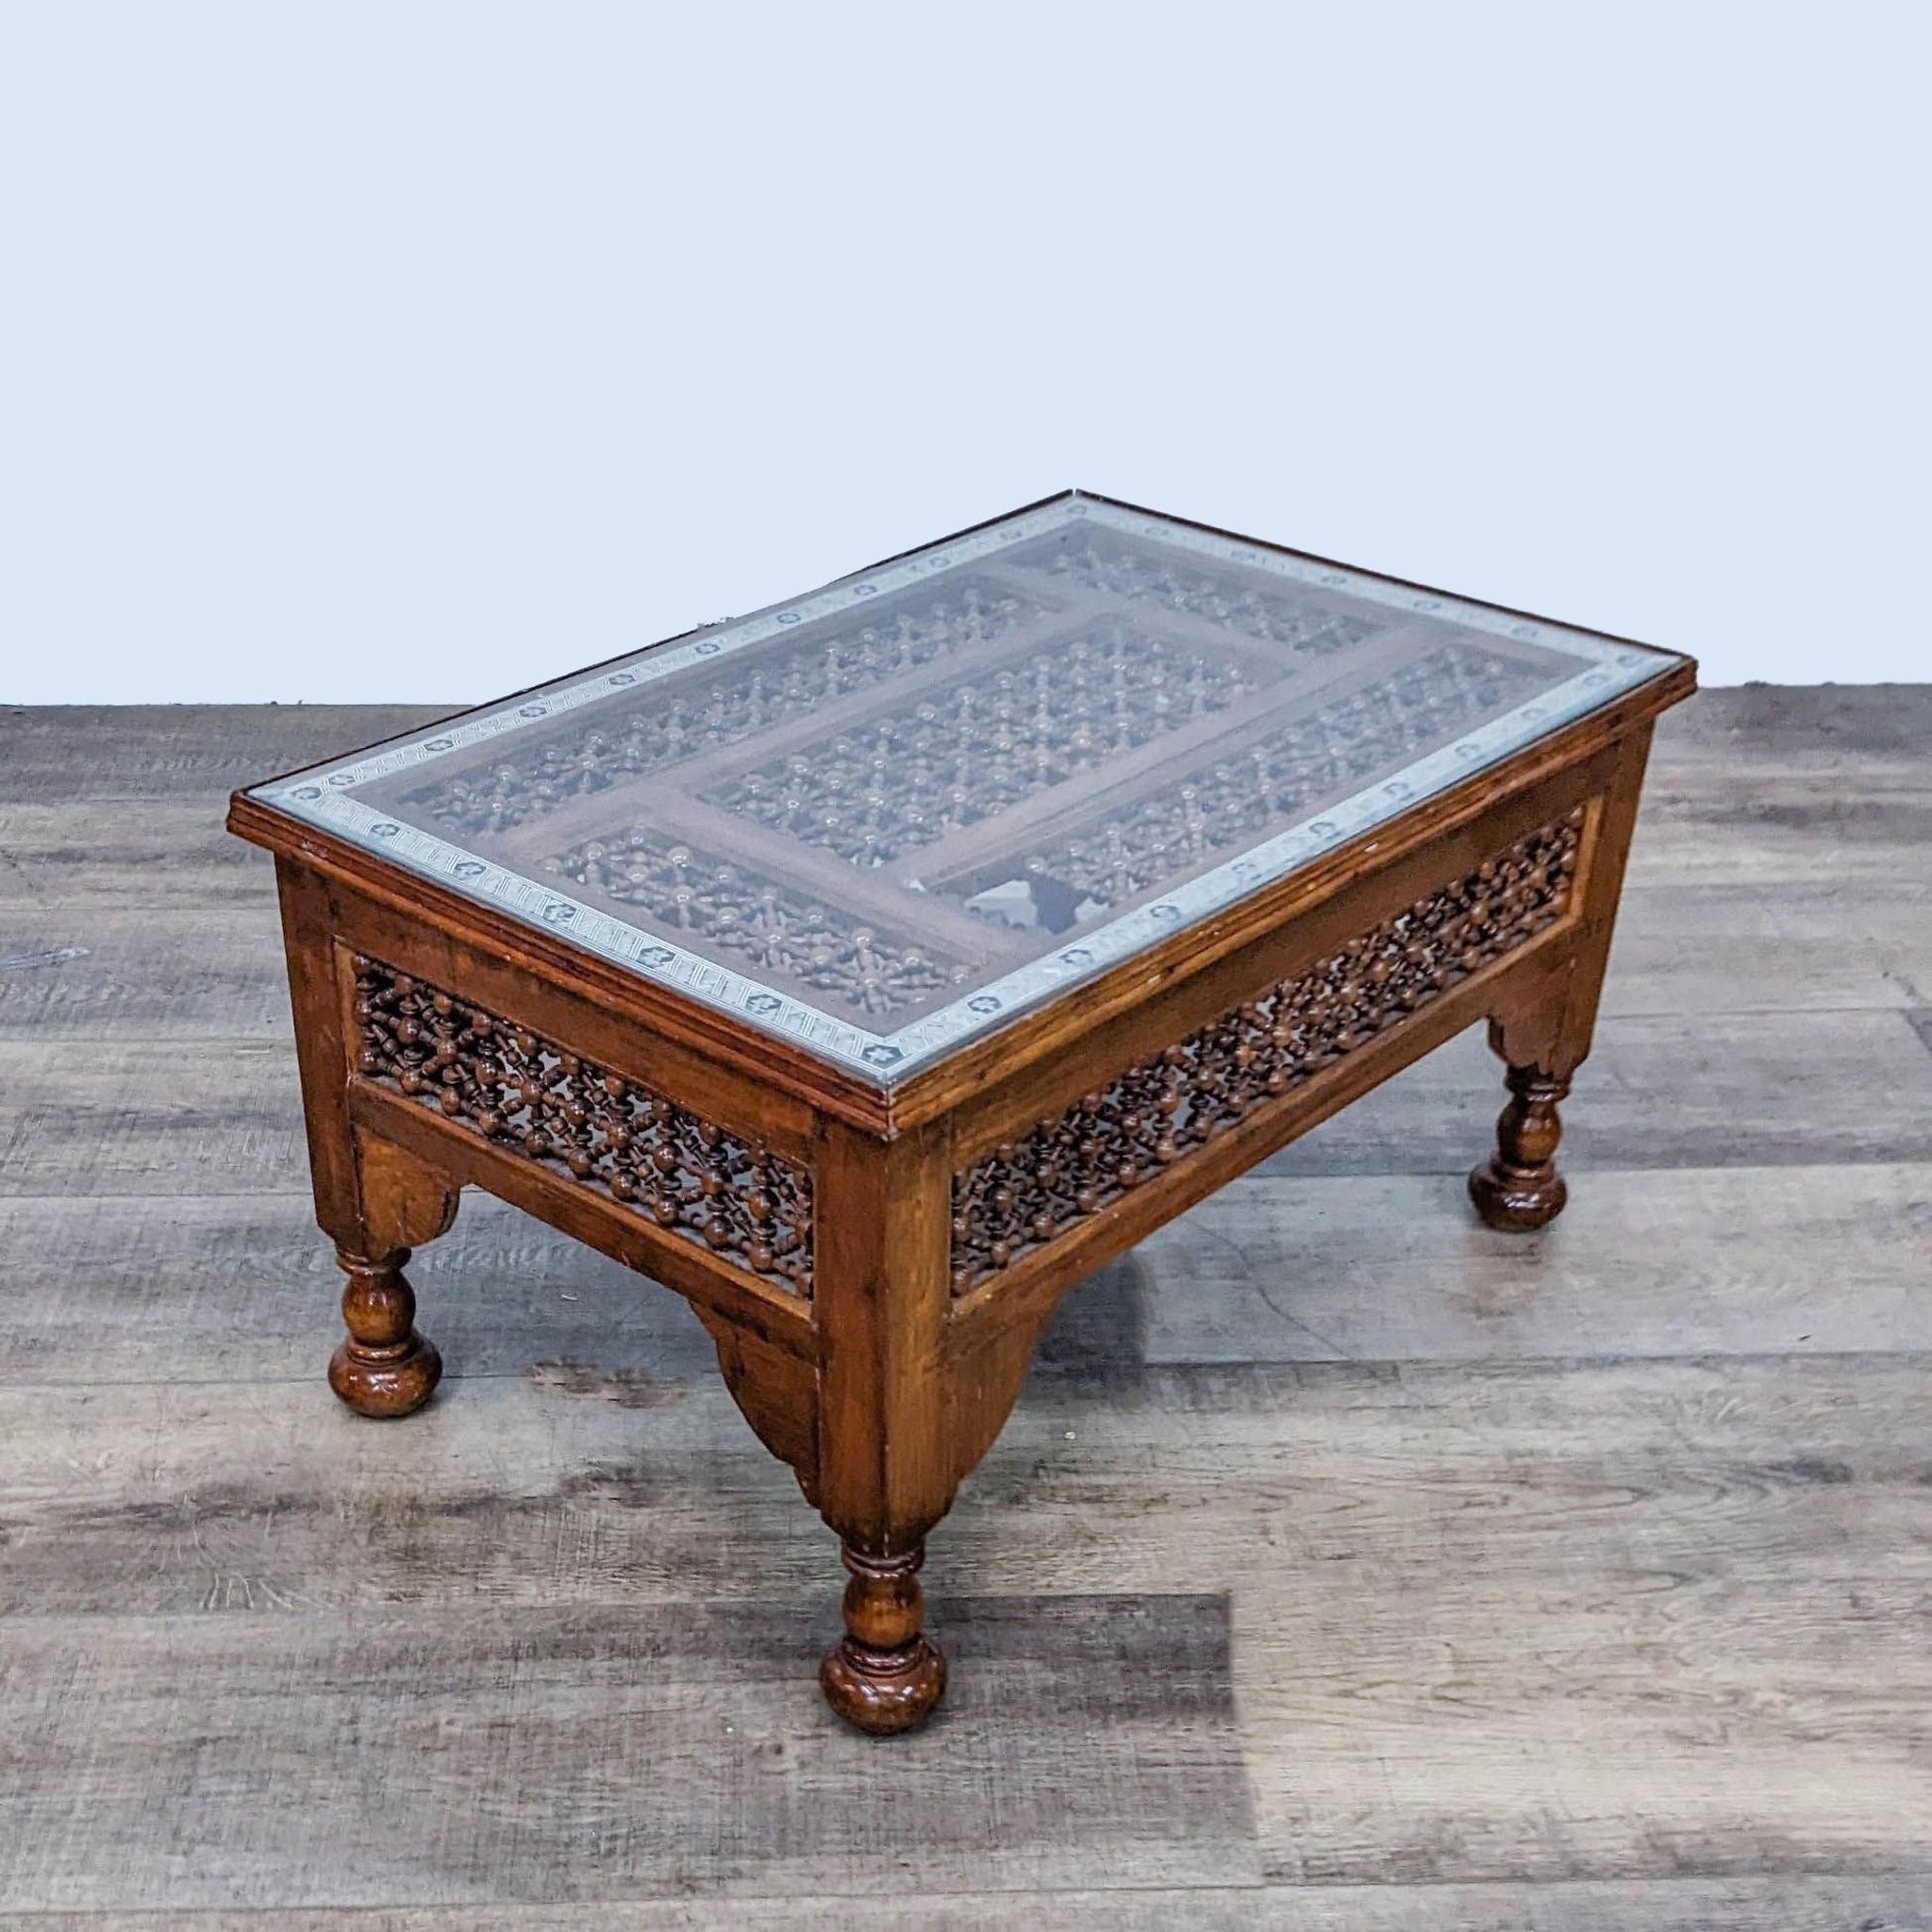 3. Angled perspective of a traditional Reperch coffee table with mashrabiya panels and mother-of-pearl inlay, showcasing missing section.